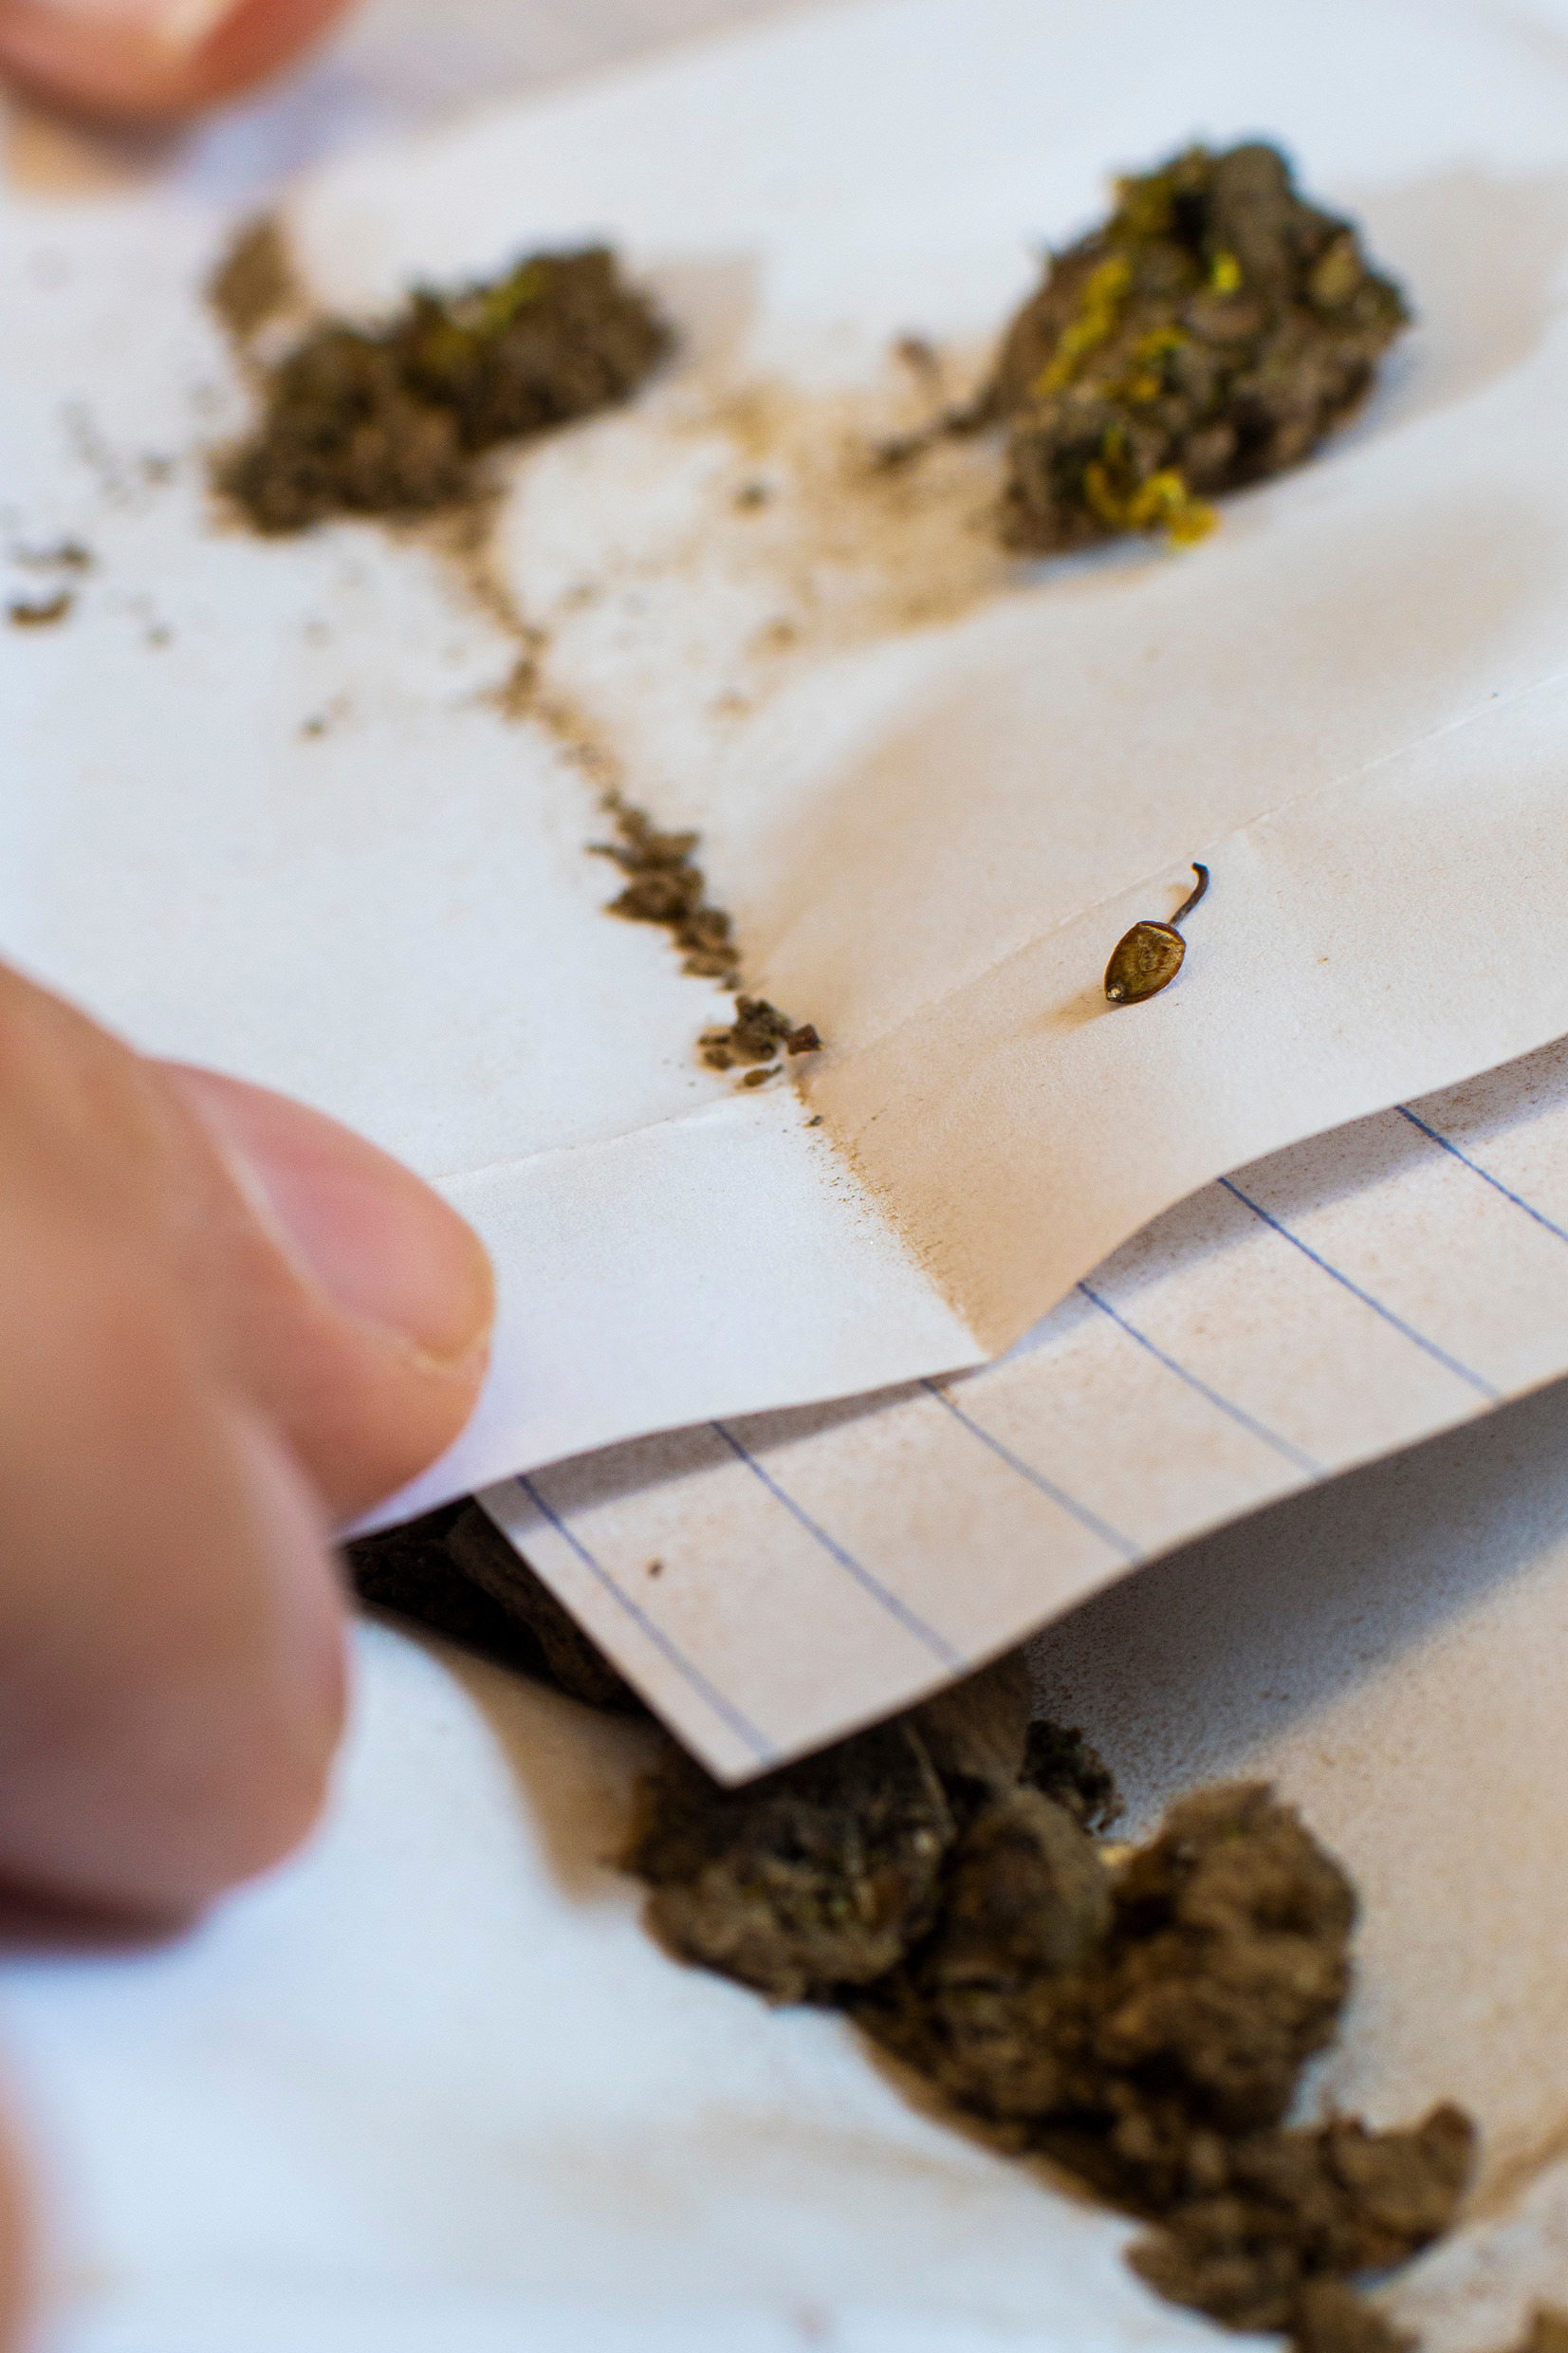 Plant specimens in clumps of dirt held in a folded crevice of a white piece of paper.